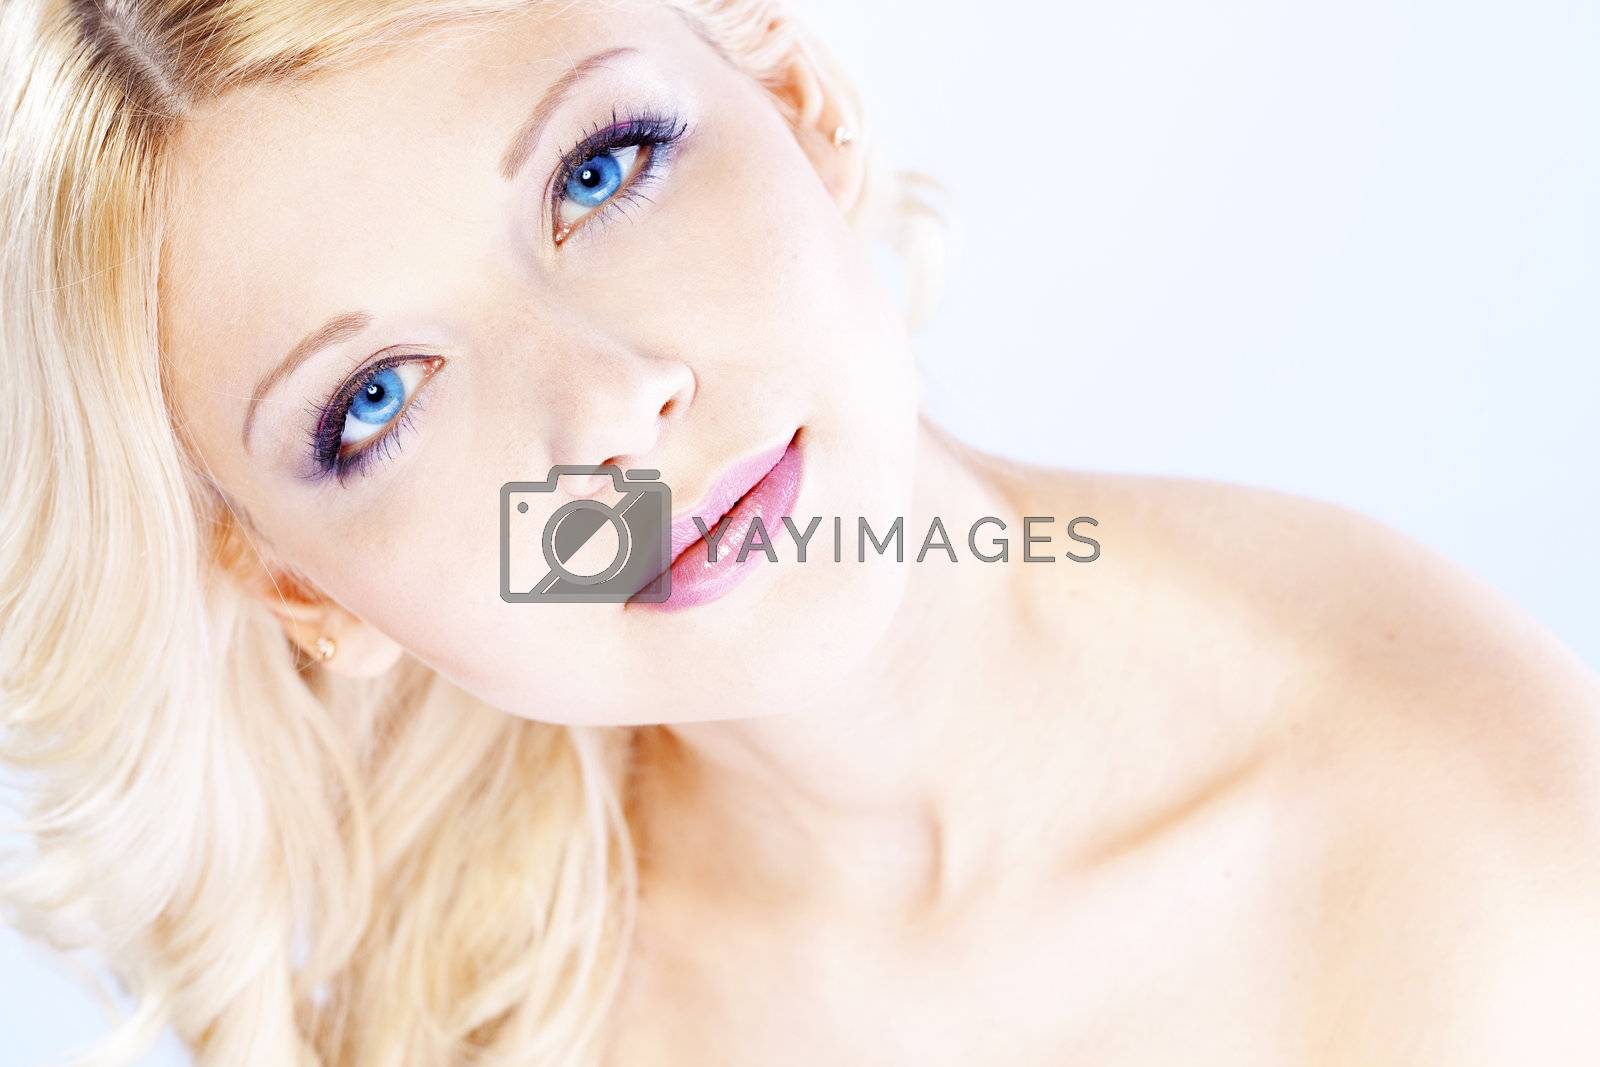 Royalty free image of Beauty by alenkasm